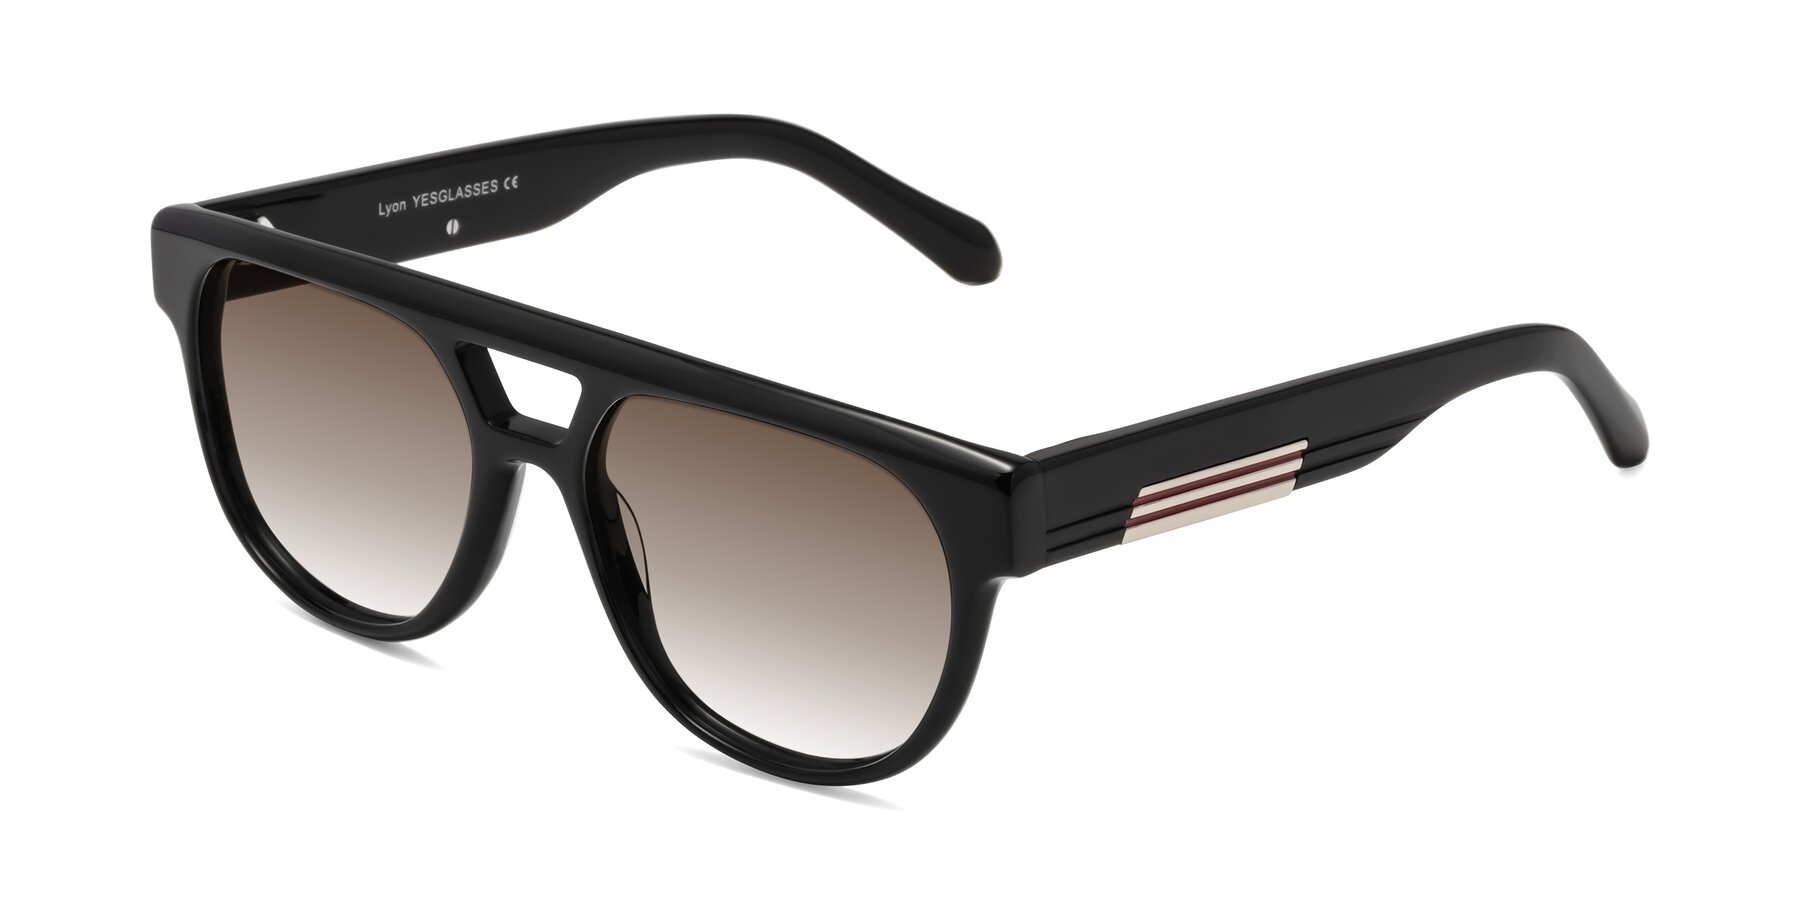 Angle of Lyon in Black with Brown Gradient Lenses